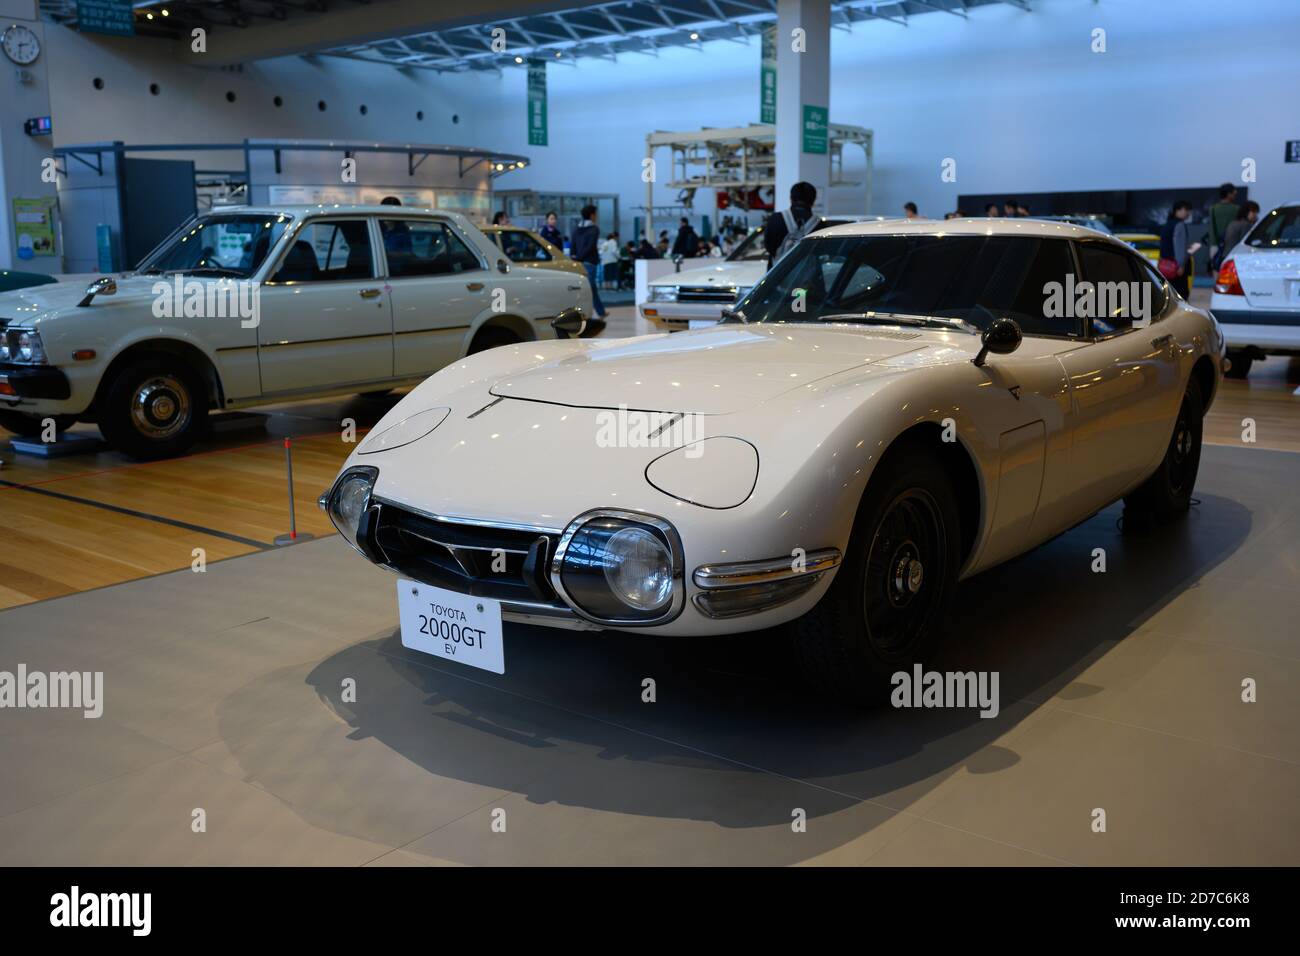 Nagoya / Japan Nov 26 2019 :  Classic sports car model 2000GT parked in the hall of the Memorial Museum of Industry and Technology. Toyota is a popula Stock Photo